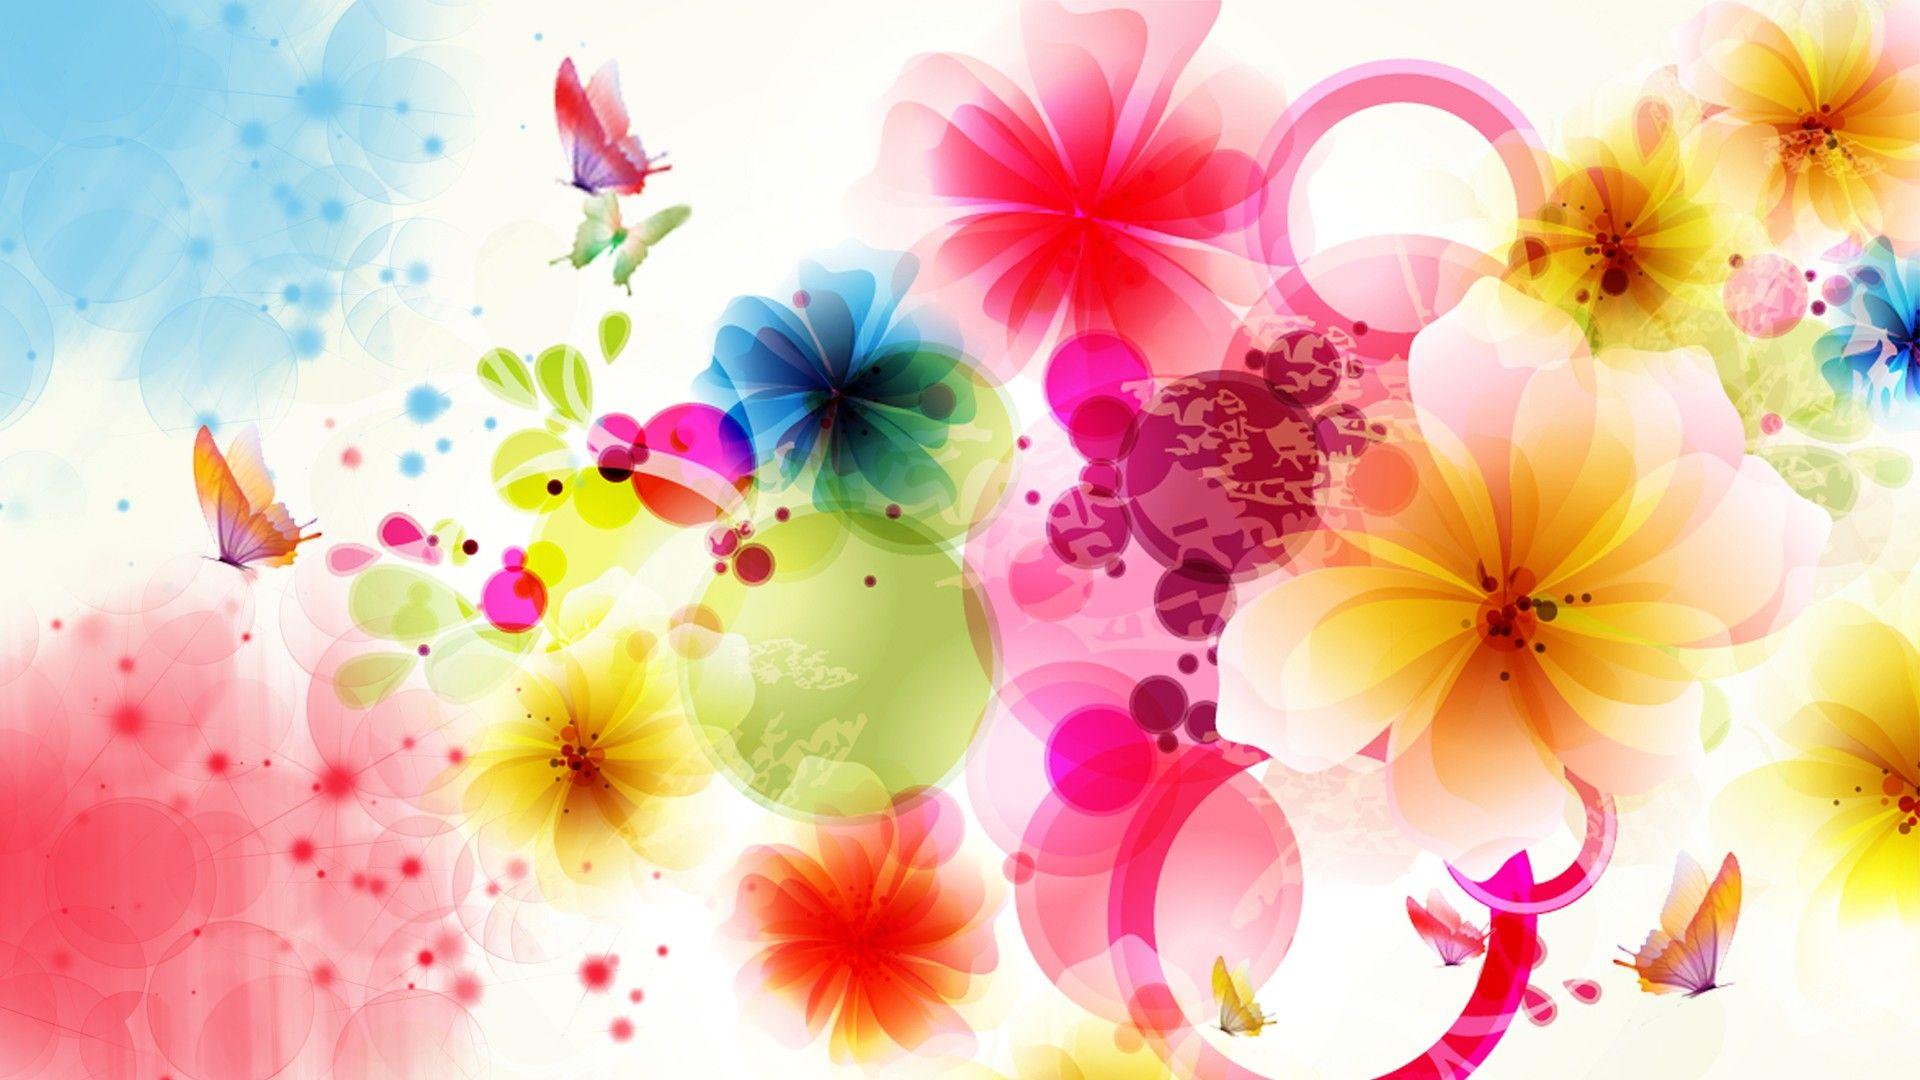 Abstract Flowers Wallpaper HD Colorful